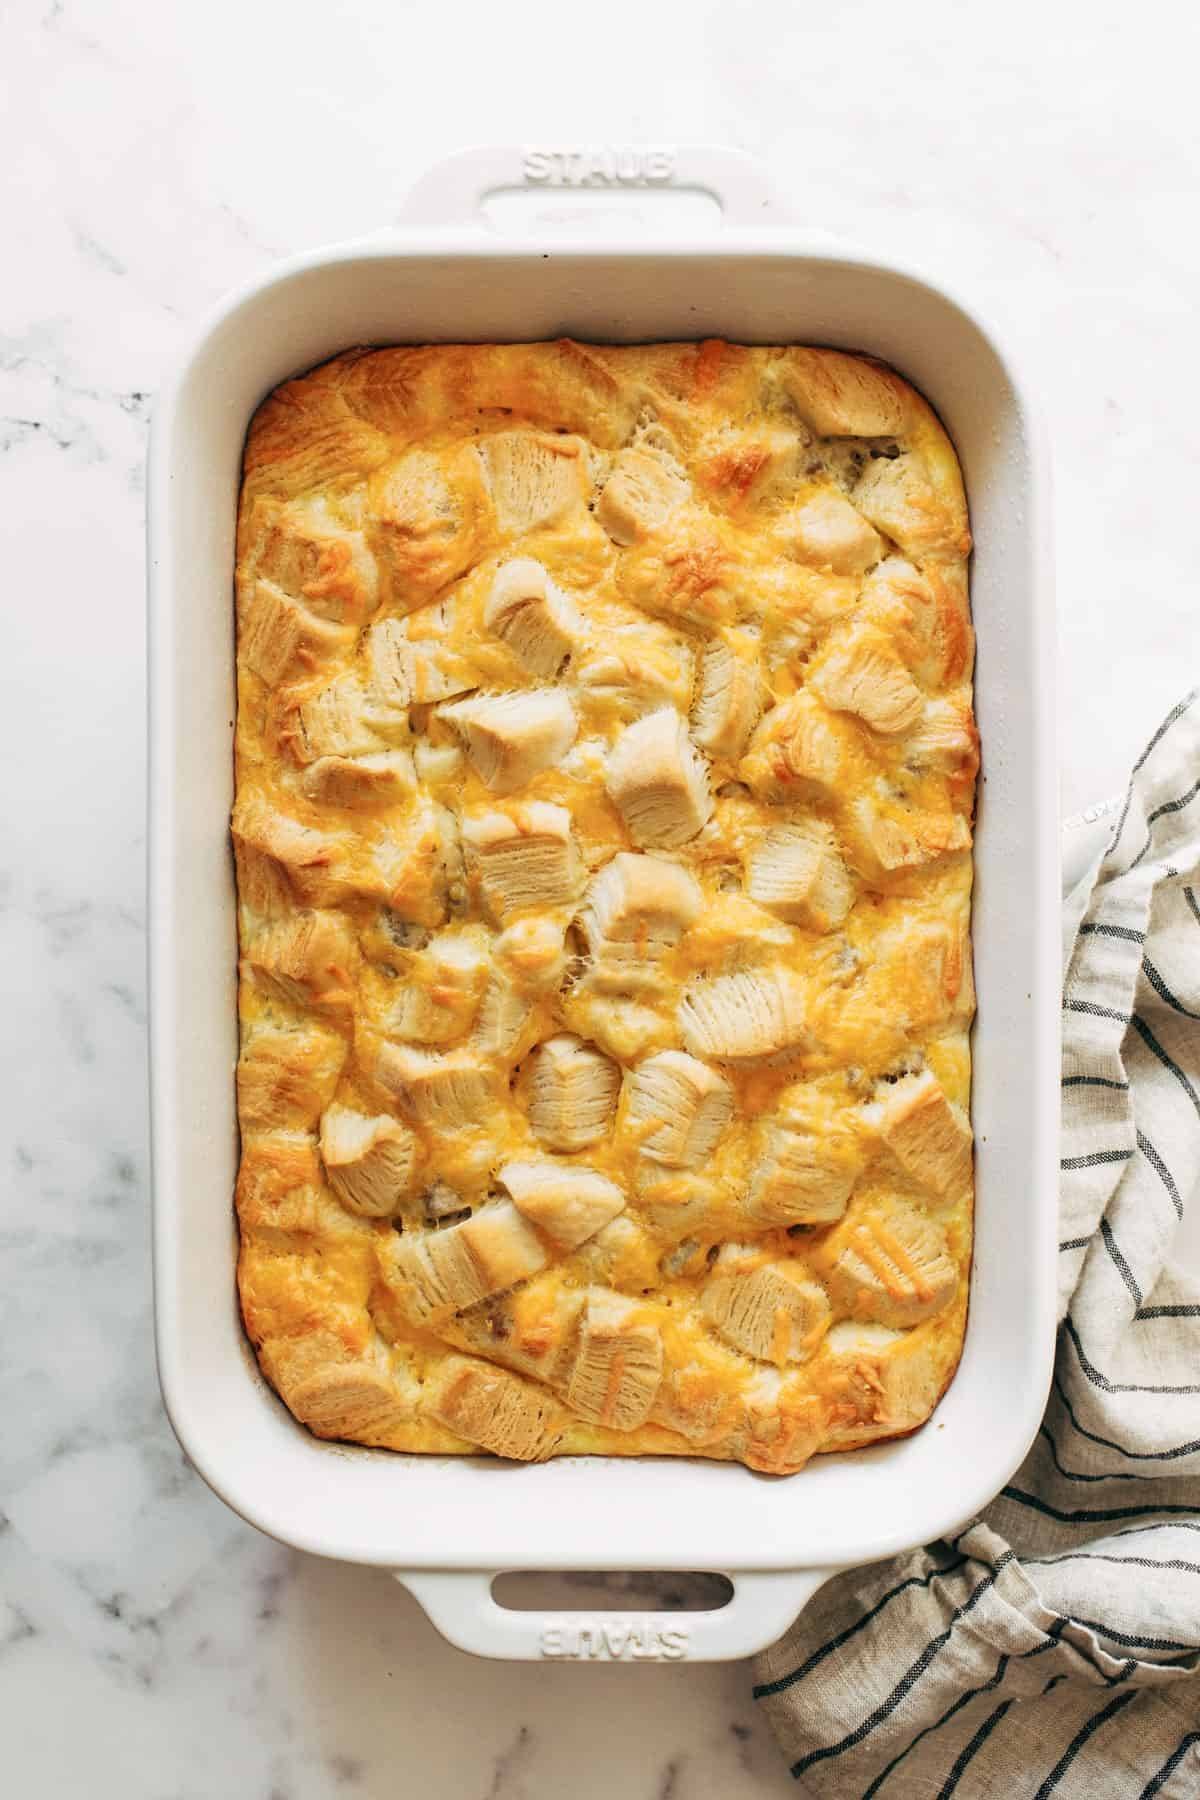 Biscuits and gravy egg bake in a casserole dish.